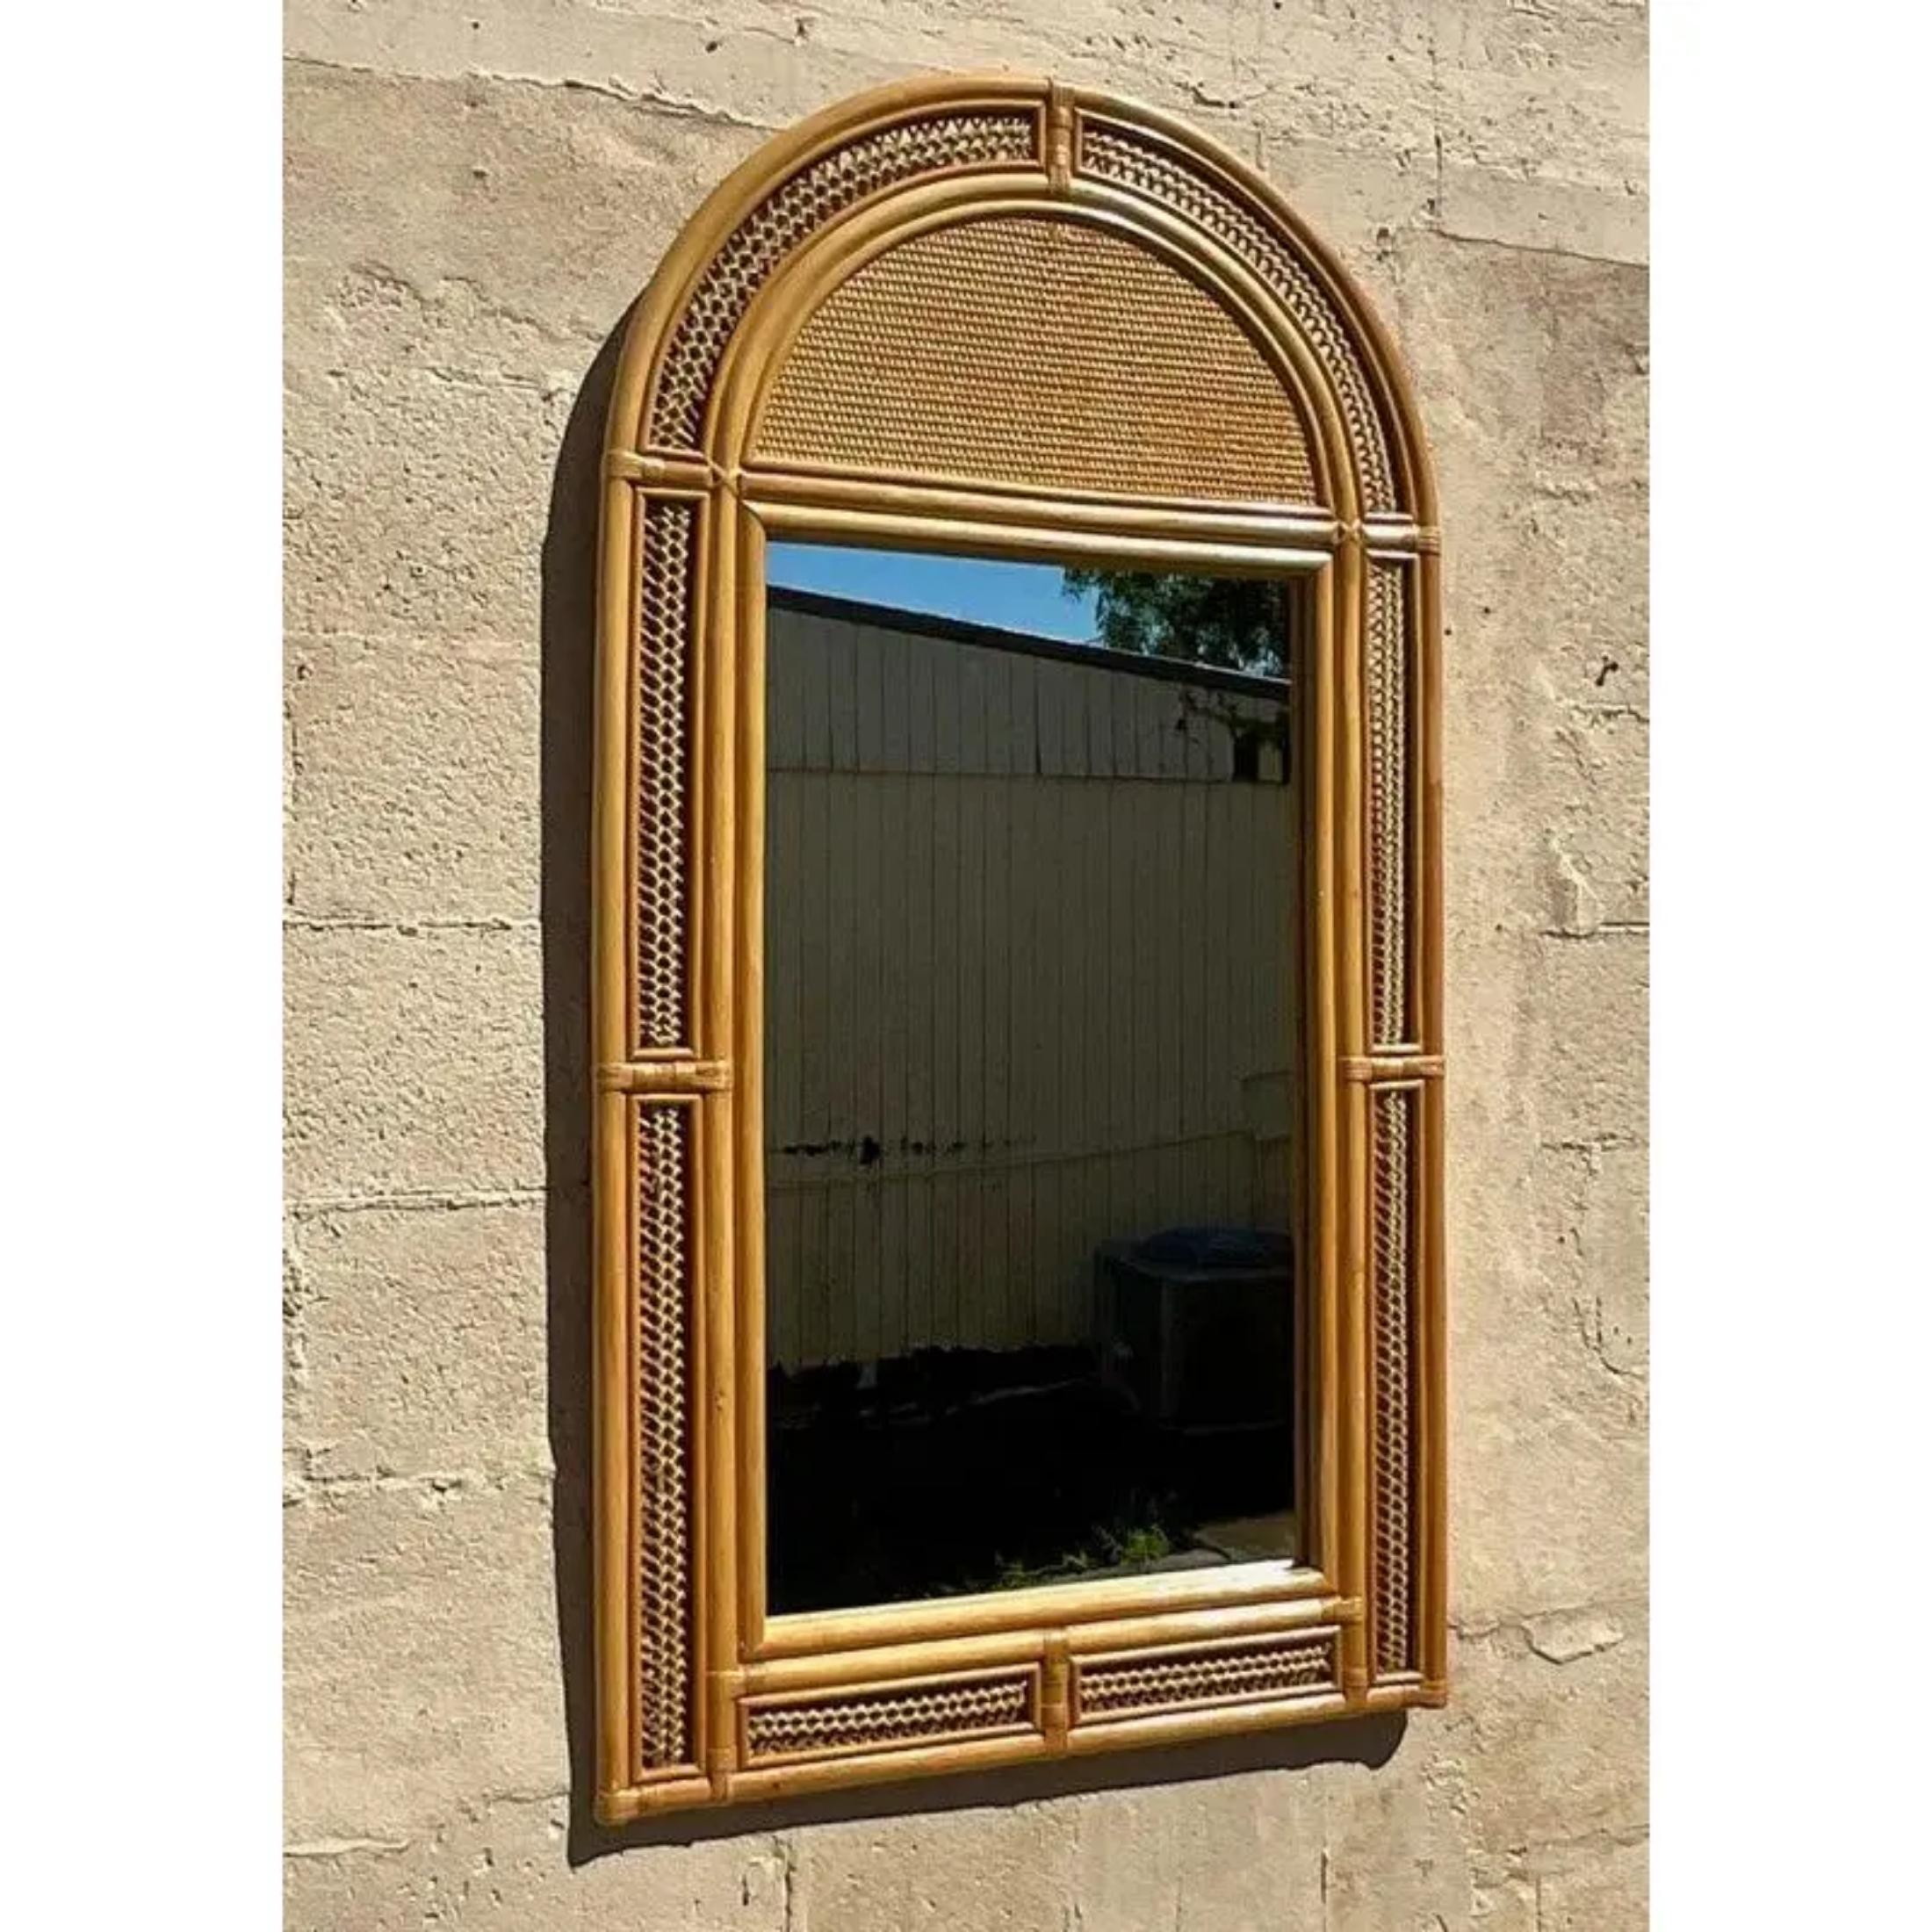 A fabulous vintage Coastal wall mirror. Chic arched rattan with a woven band along the edge. Acquired from a Palm Beach estate